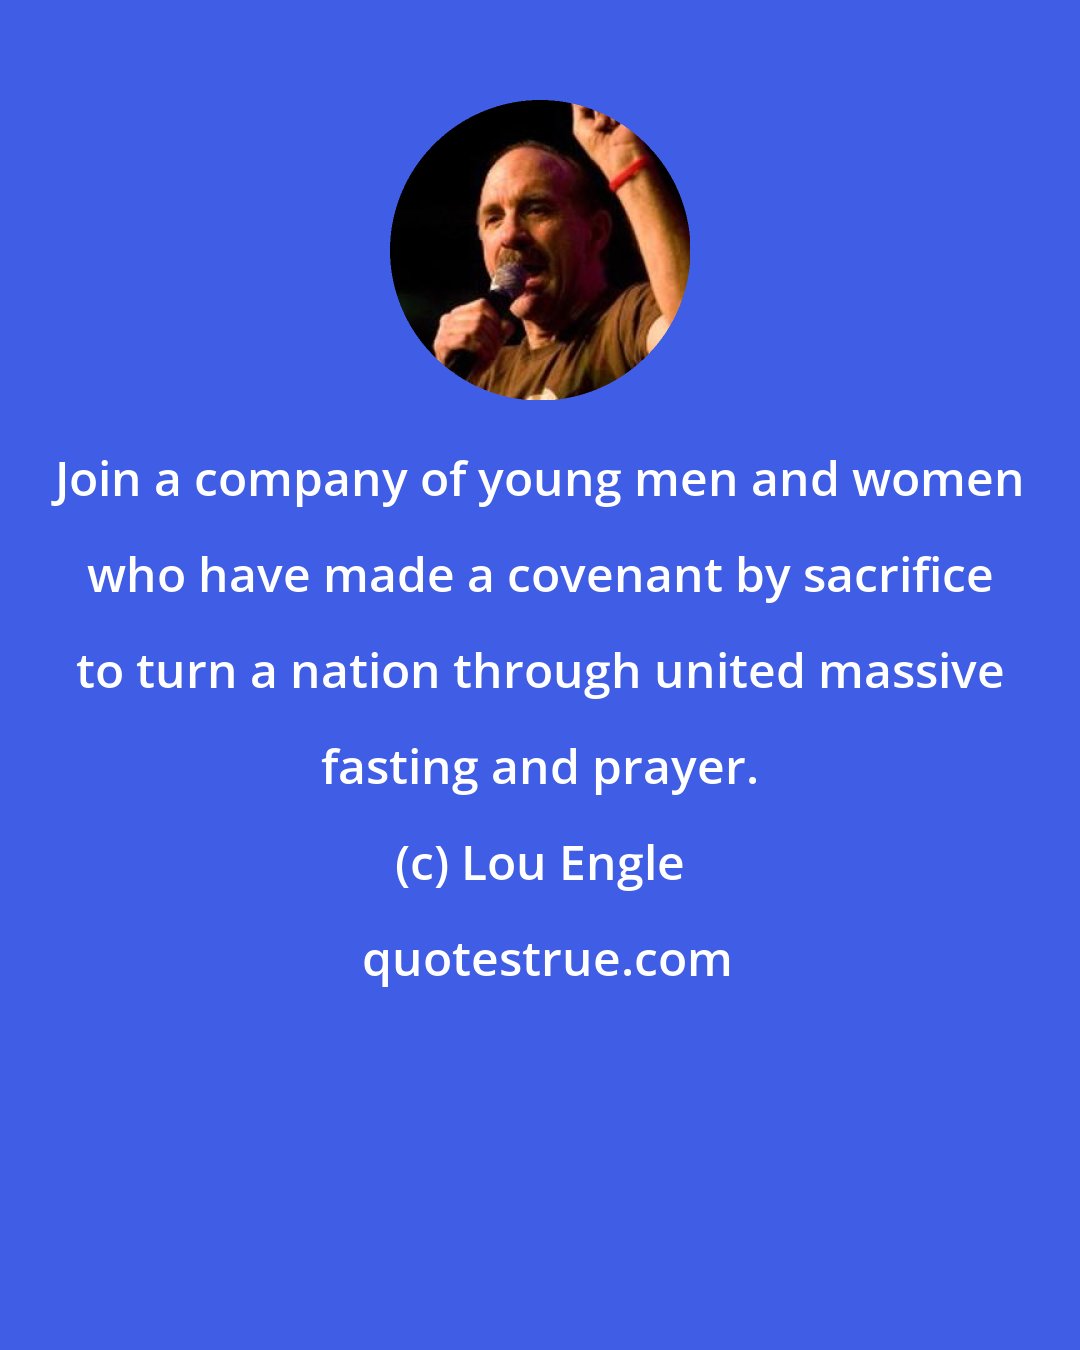 Lou Engle: Join a company of young men and women who have made a covenant by sacrifice to turn a nation through united massive fasting and prayer.